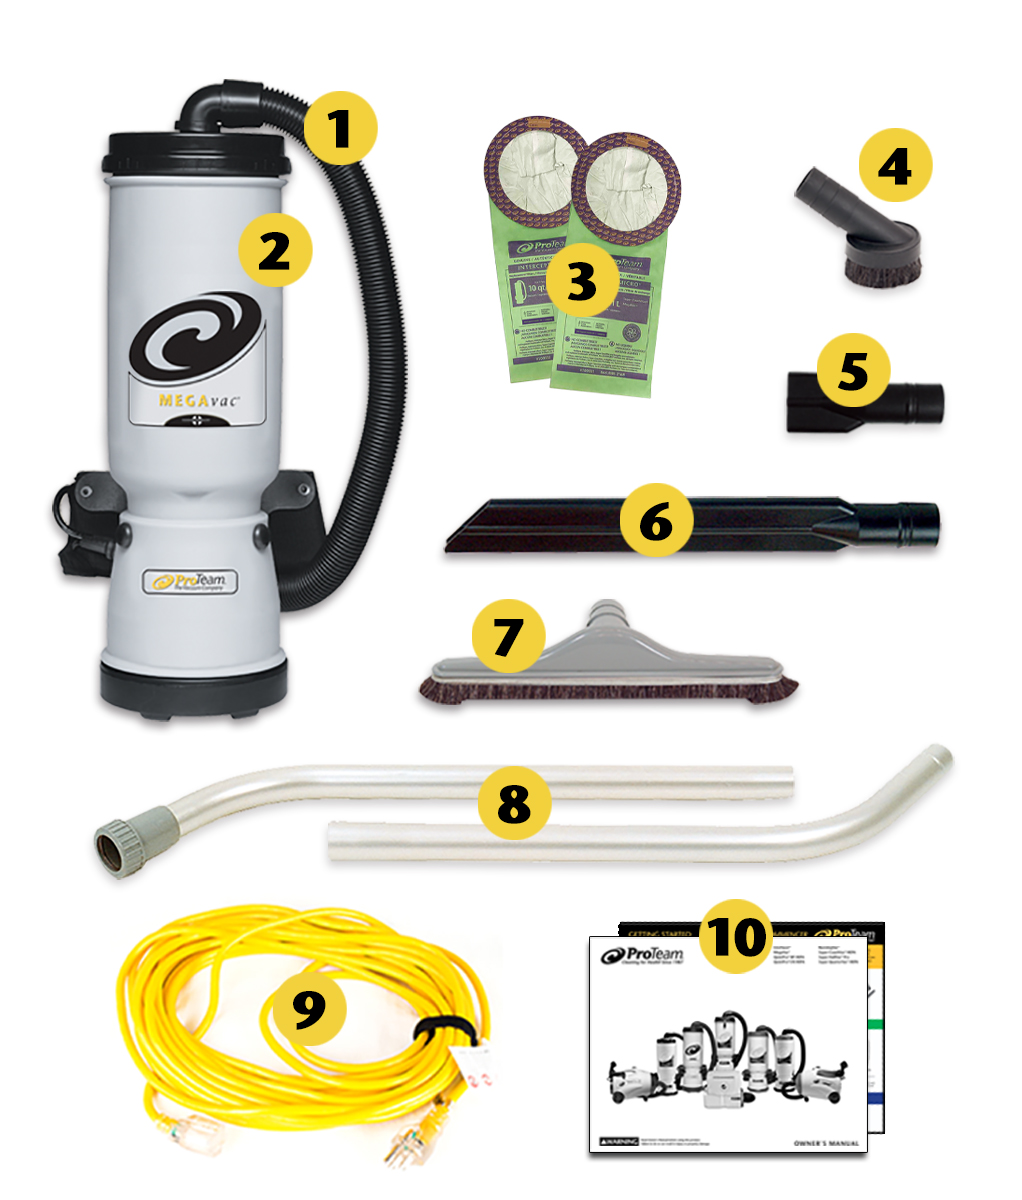 Image of what is included in the box of ProTeam MegaVac, 6 qt. Backpack Vacuum